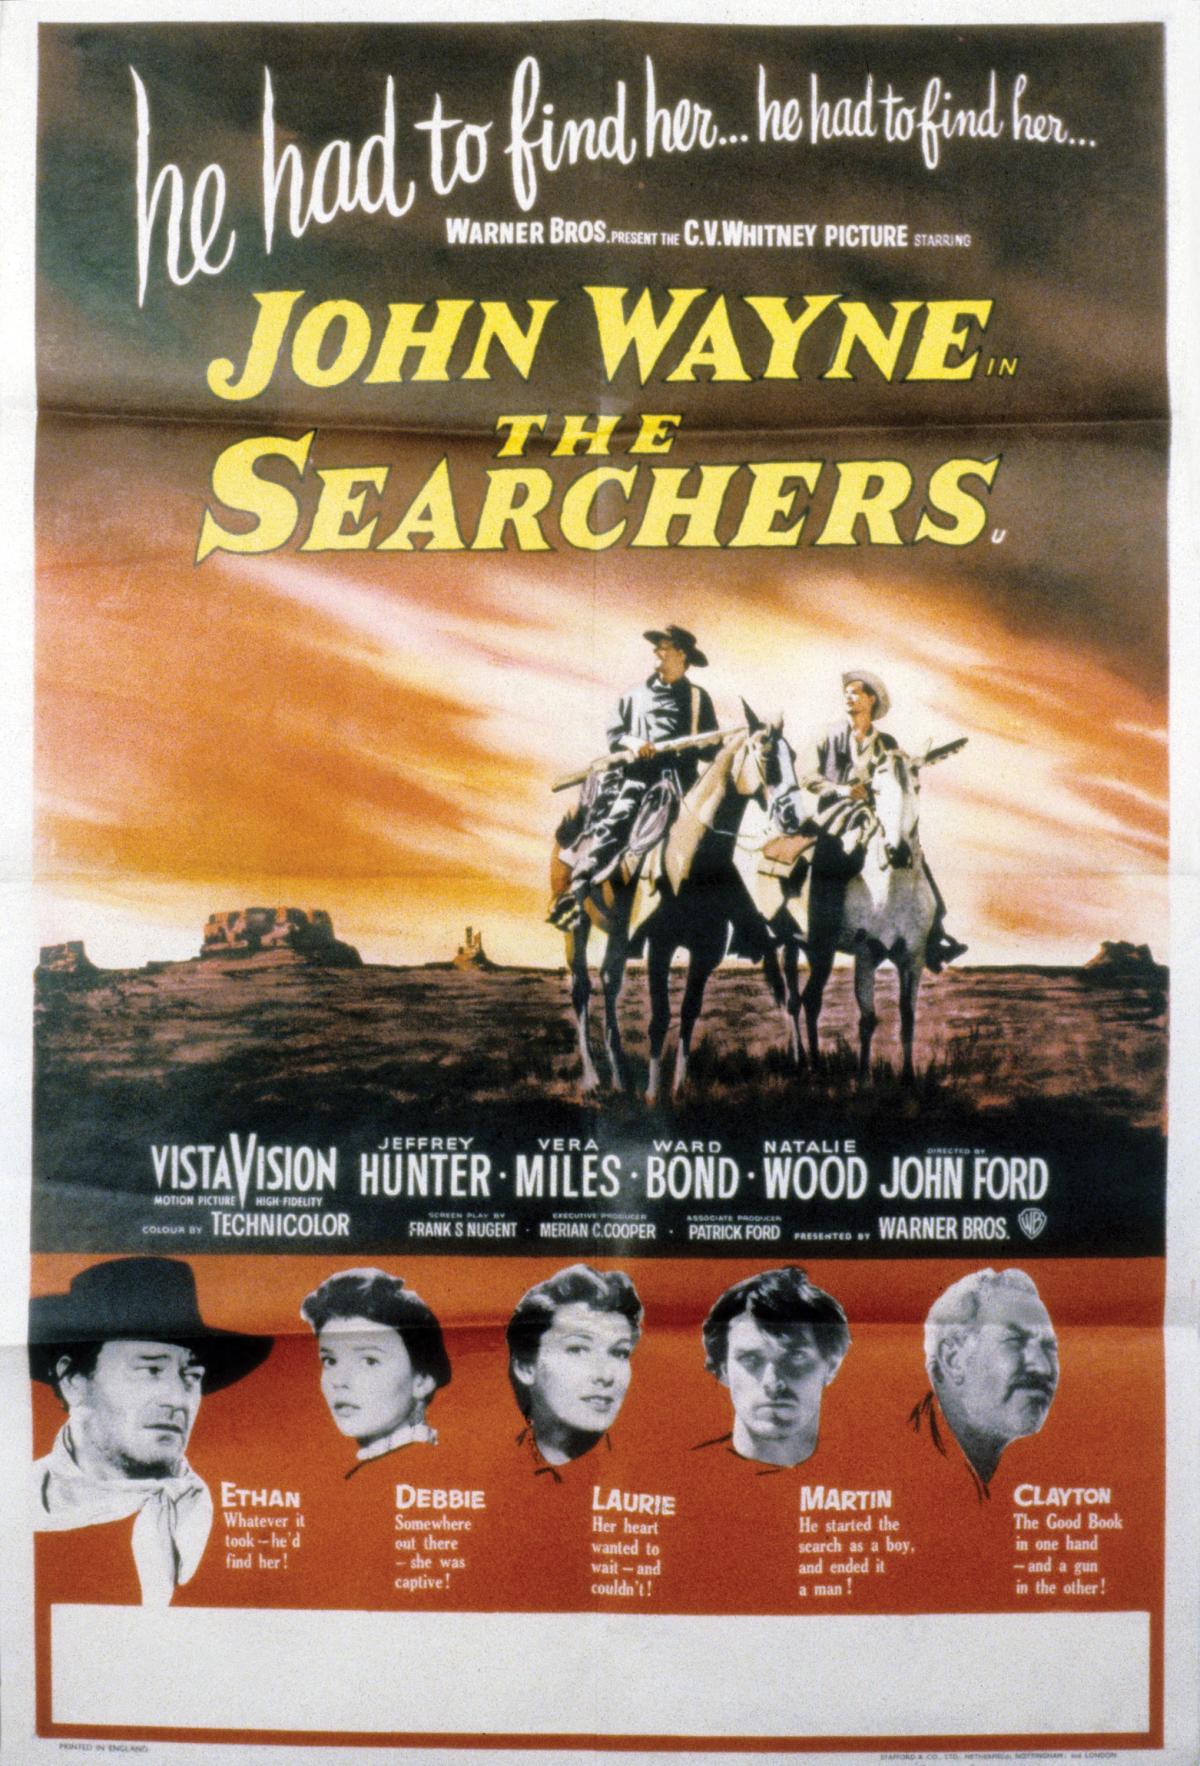 Movie poster for "The Searchers"